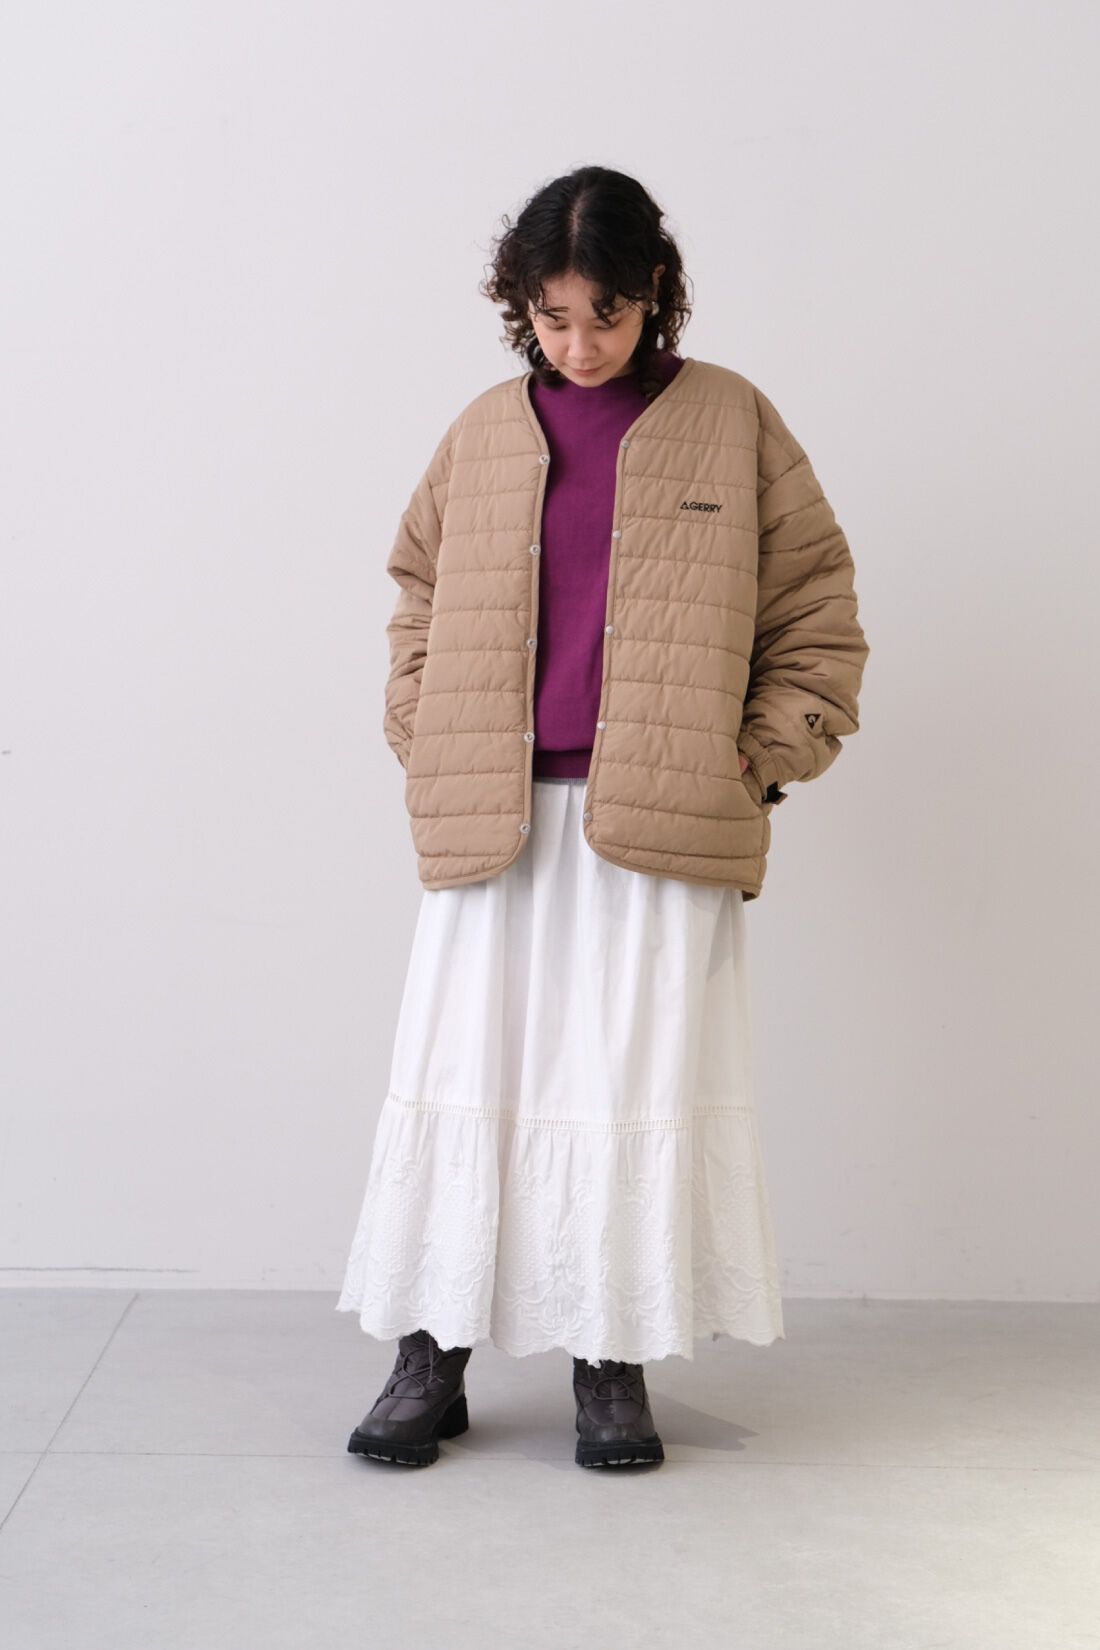 Real Stock|MEDE19F 〈SELECT〉　【GERRY】 QUILTING JACKET|2 beige　モデル身長：157cm